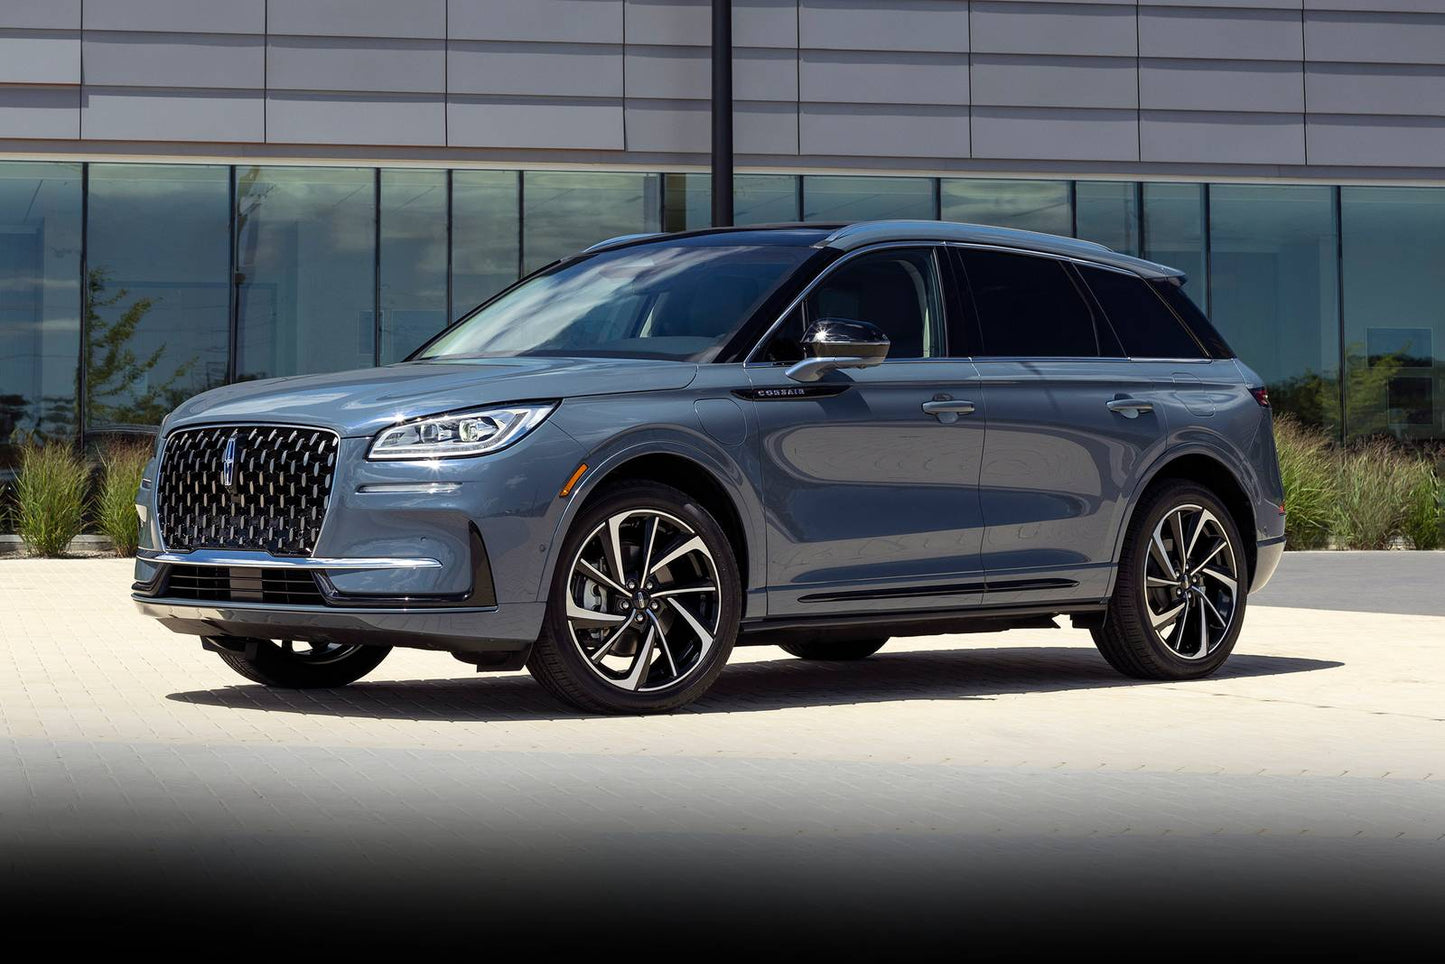 2024 Lincoln Corsair Grand Touring 4dr SUV AWD (2.5L 4cyl gas/electric plug-in hybrid EVT)